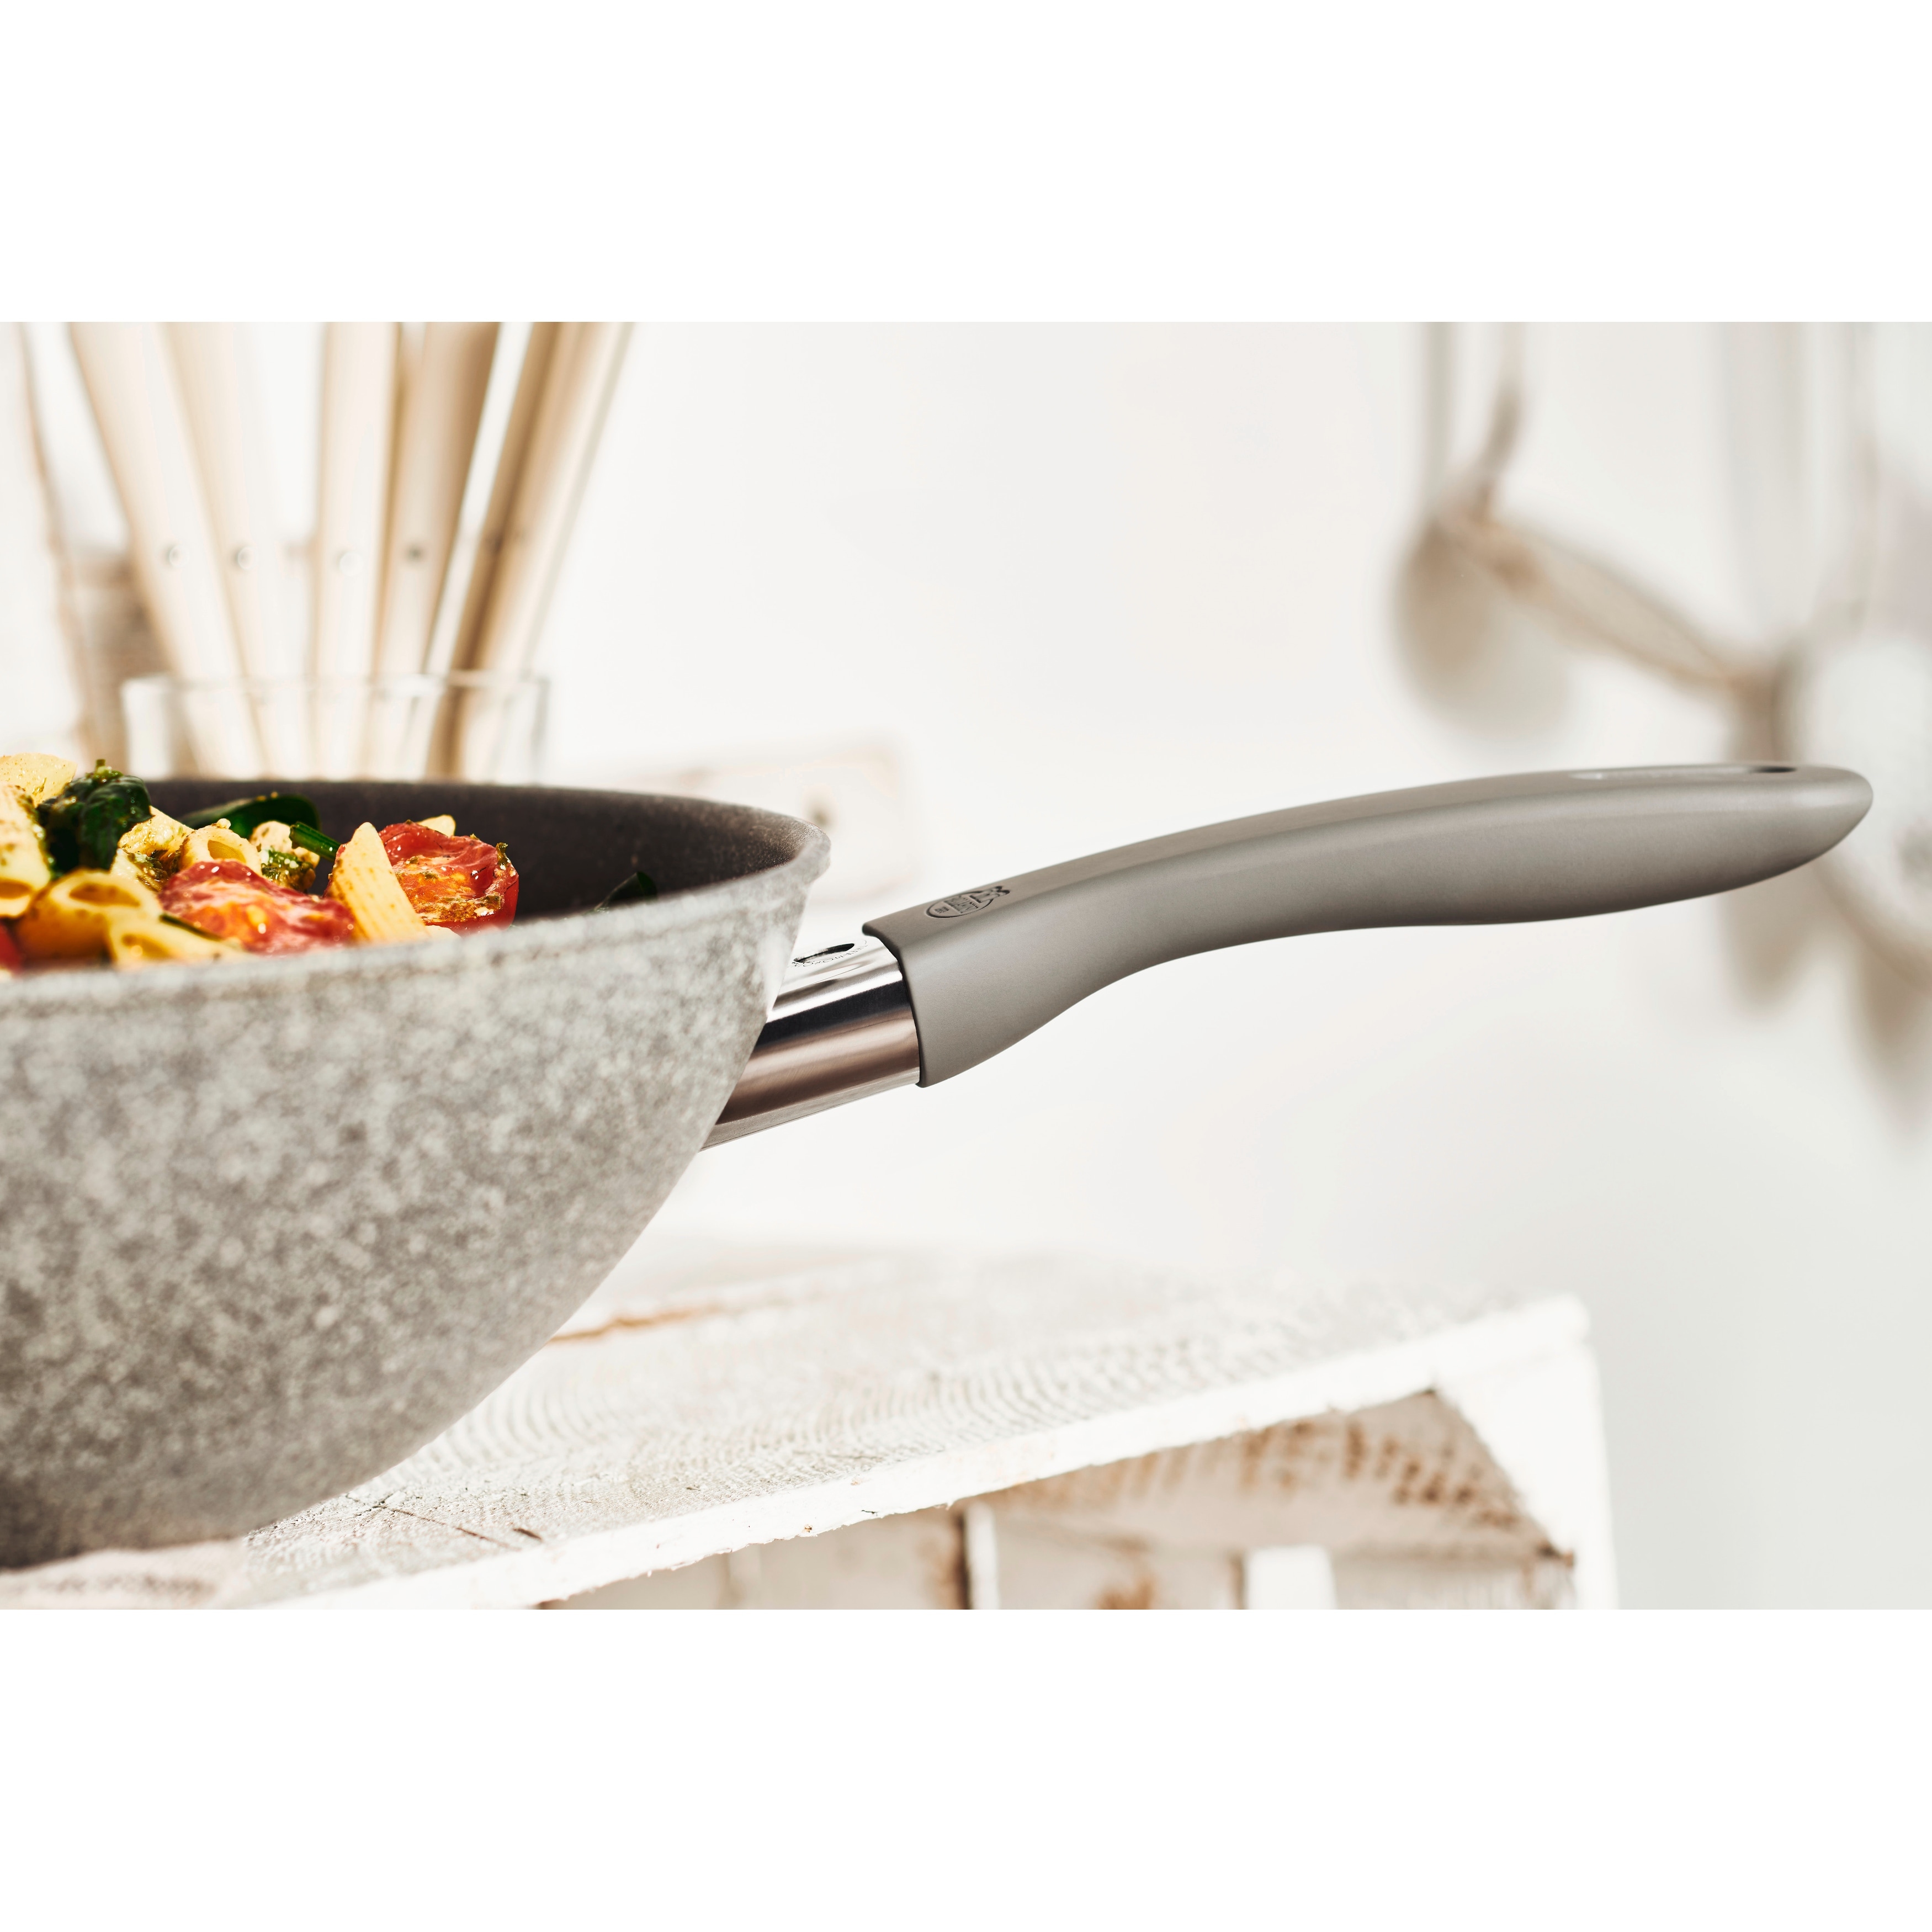 BALLARINI Parma Plus by HENCKELS 11-inch Aluminum Nonstick Stir Fry Pan  with Lid, Made in Italy - Grey - Bed Bath & Beyond - 33032544